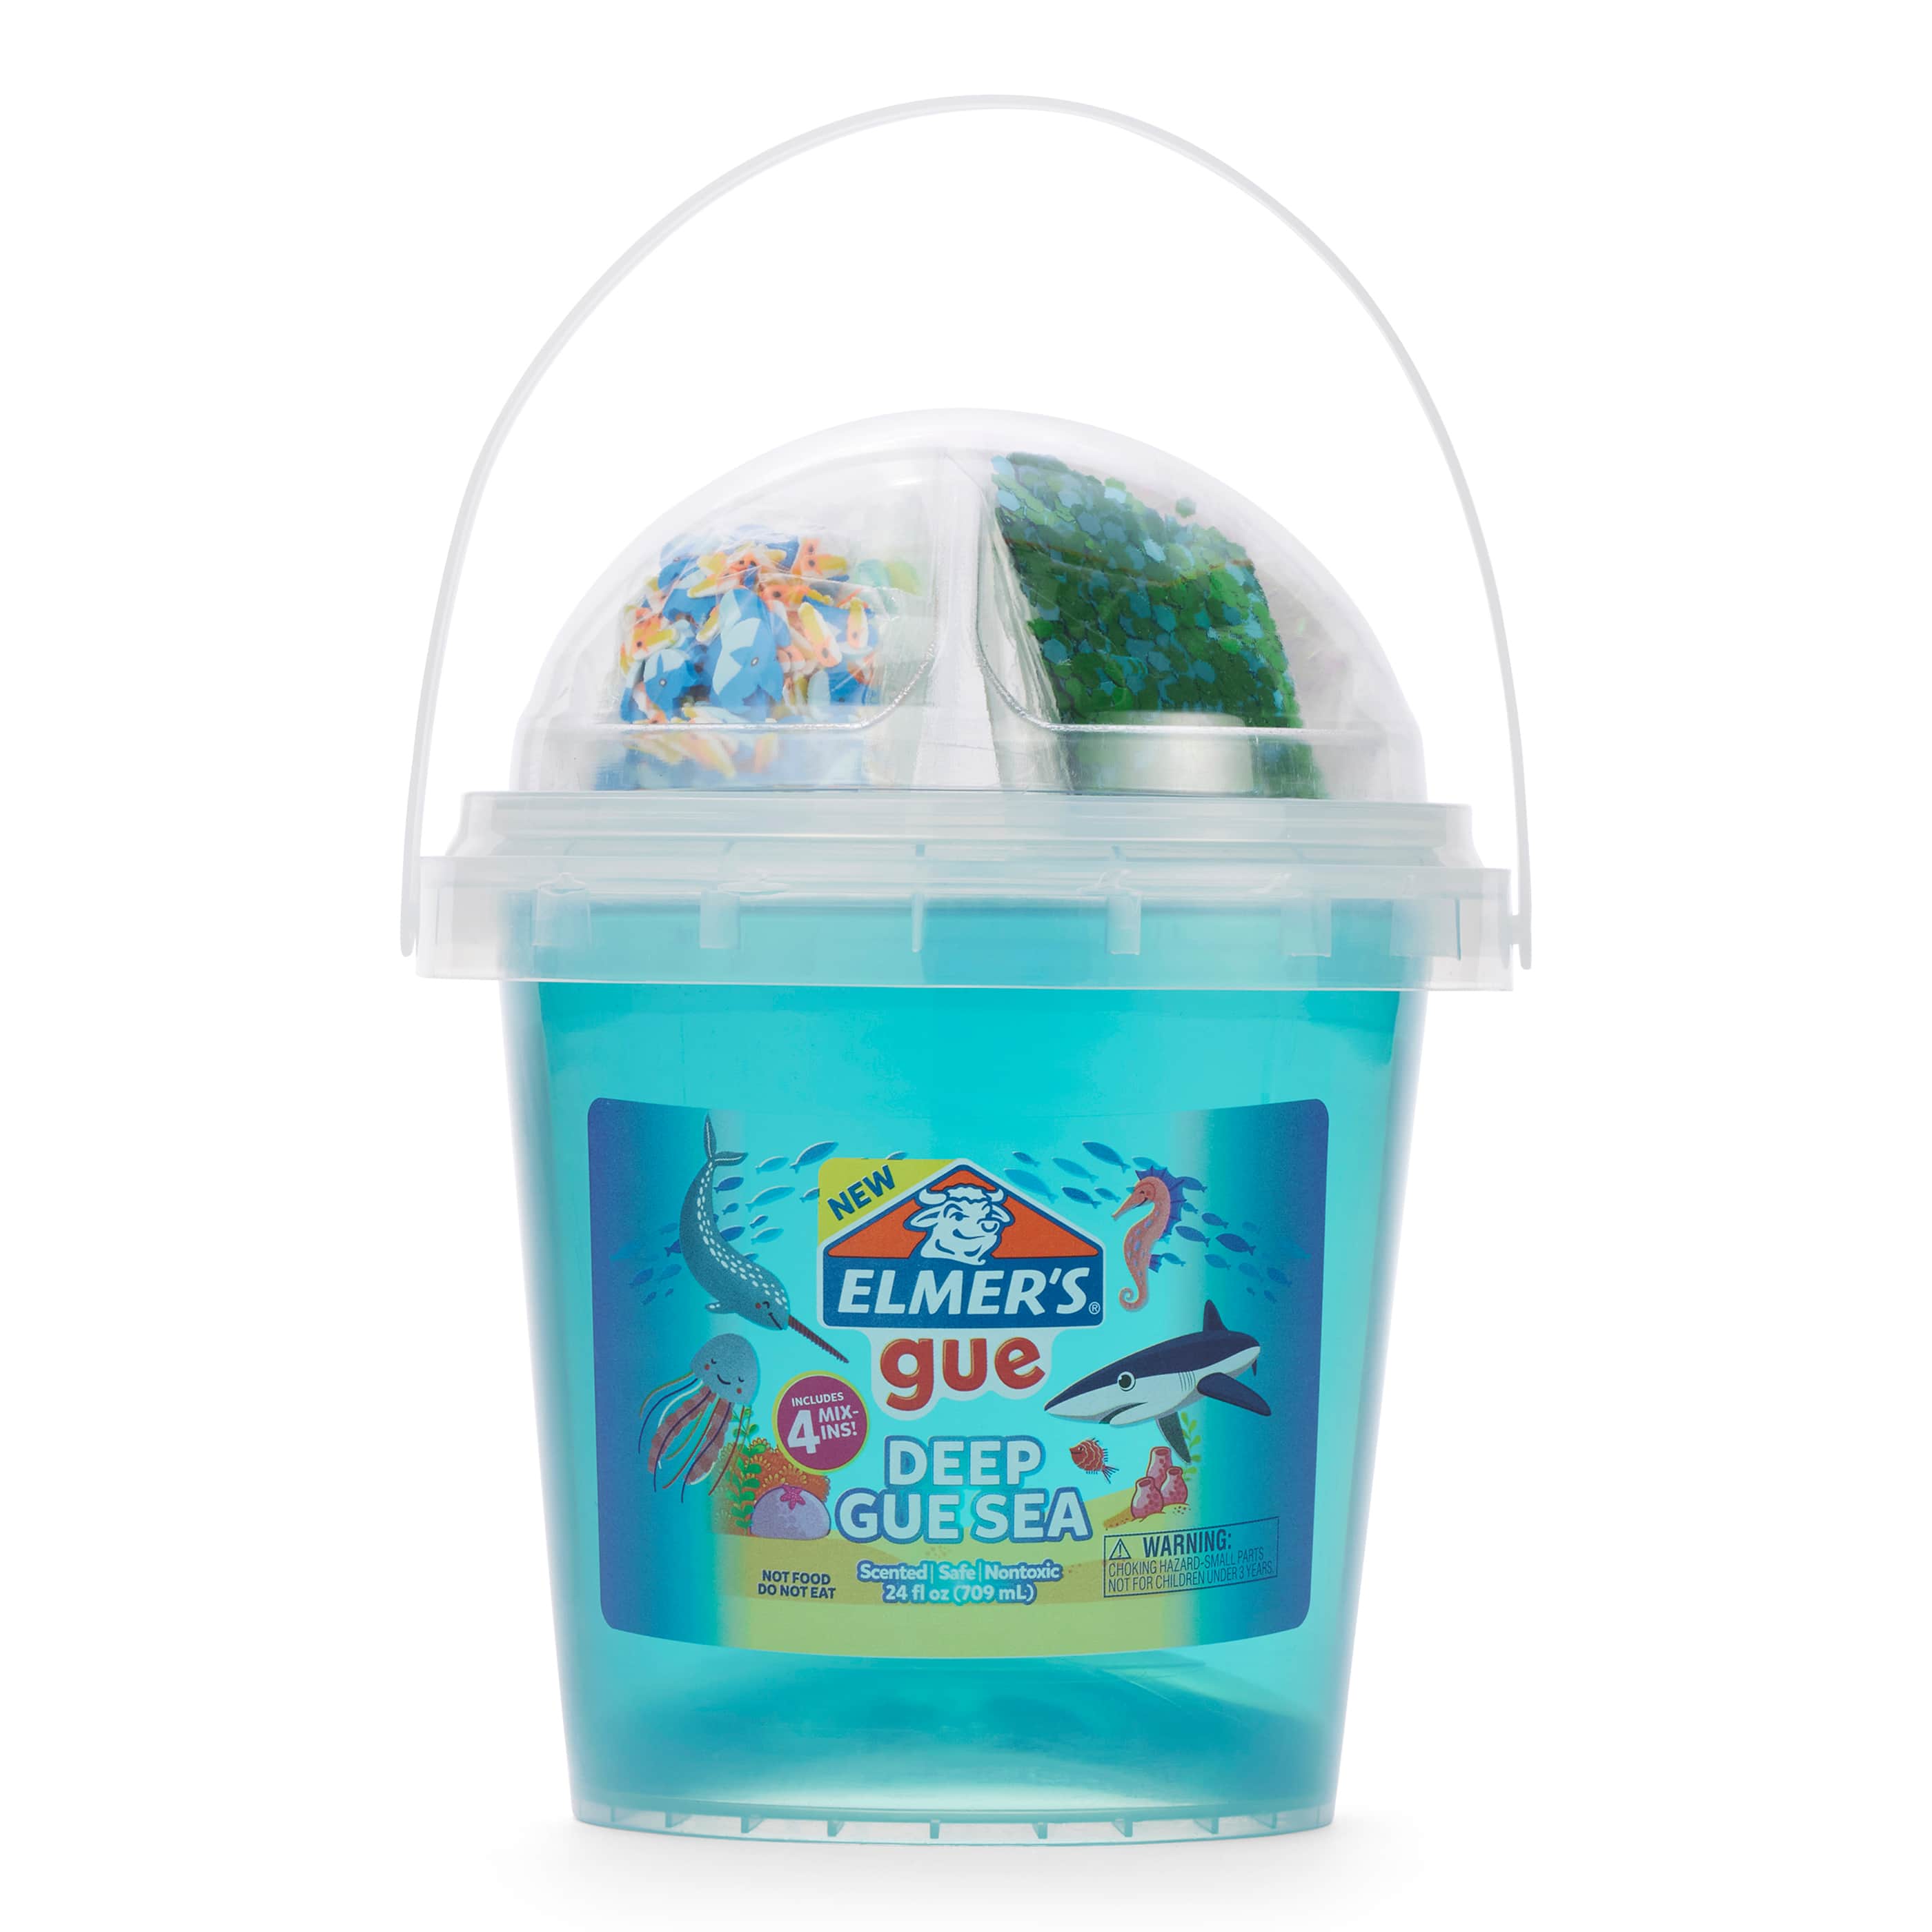 Elmer's Gue 3lb Glassy Clear Deluxe Premade Slime Kit With Mix-ins, slimes